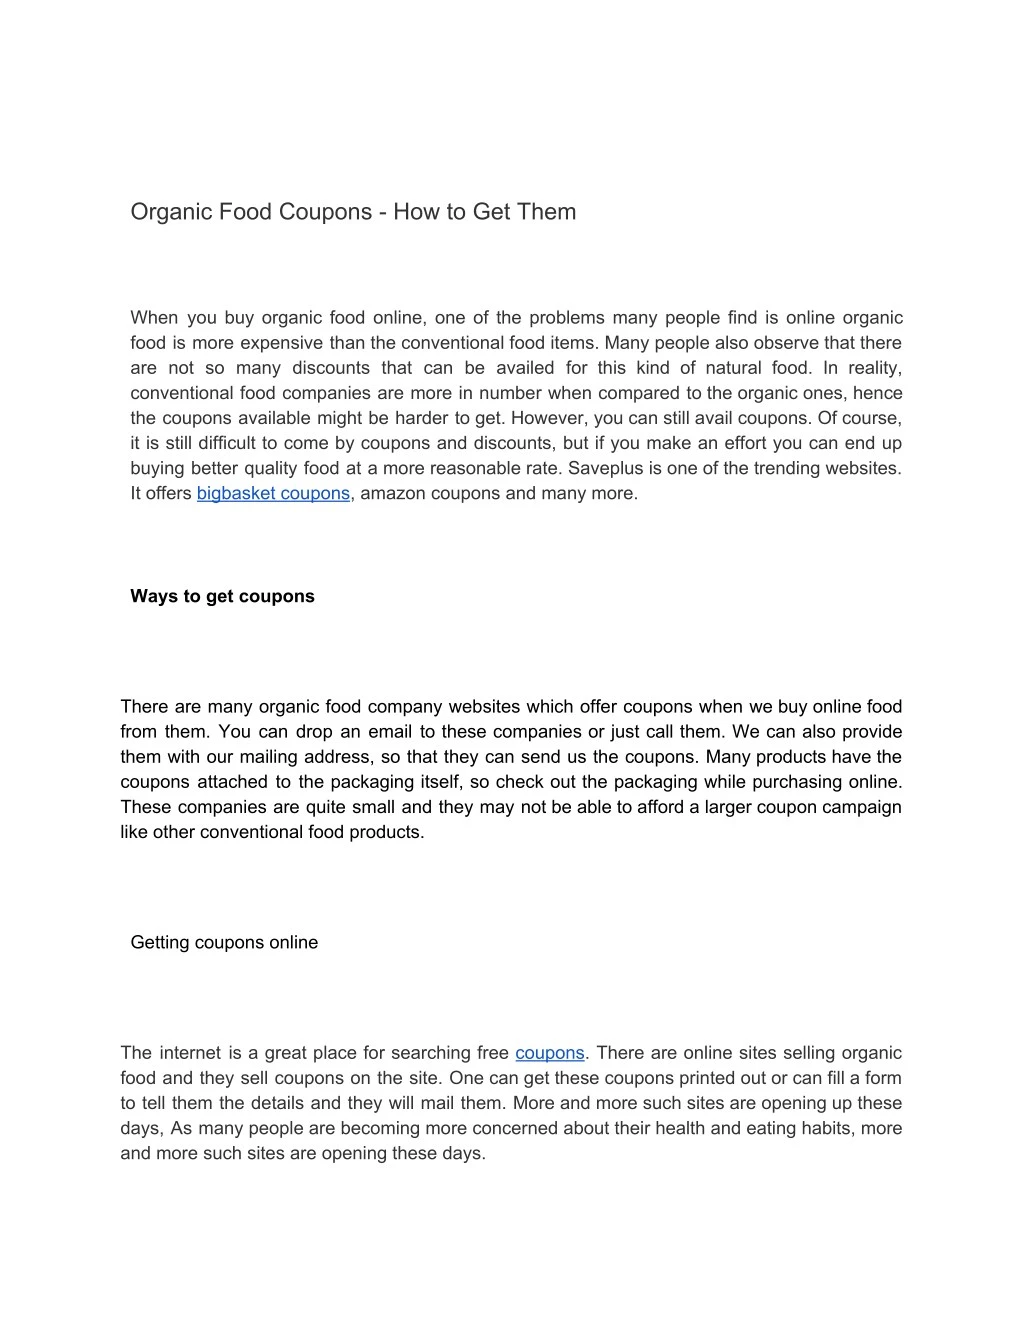 organic food coupons how to get them